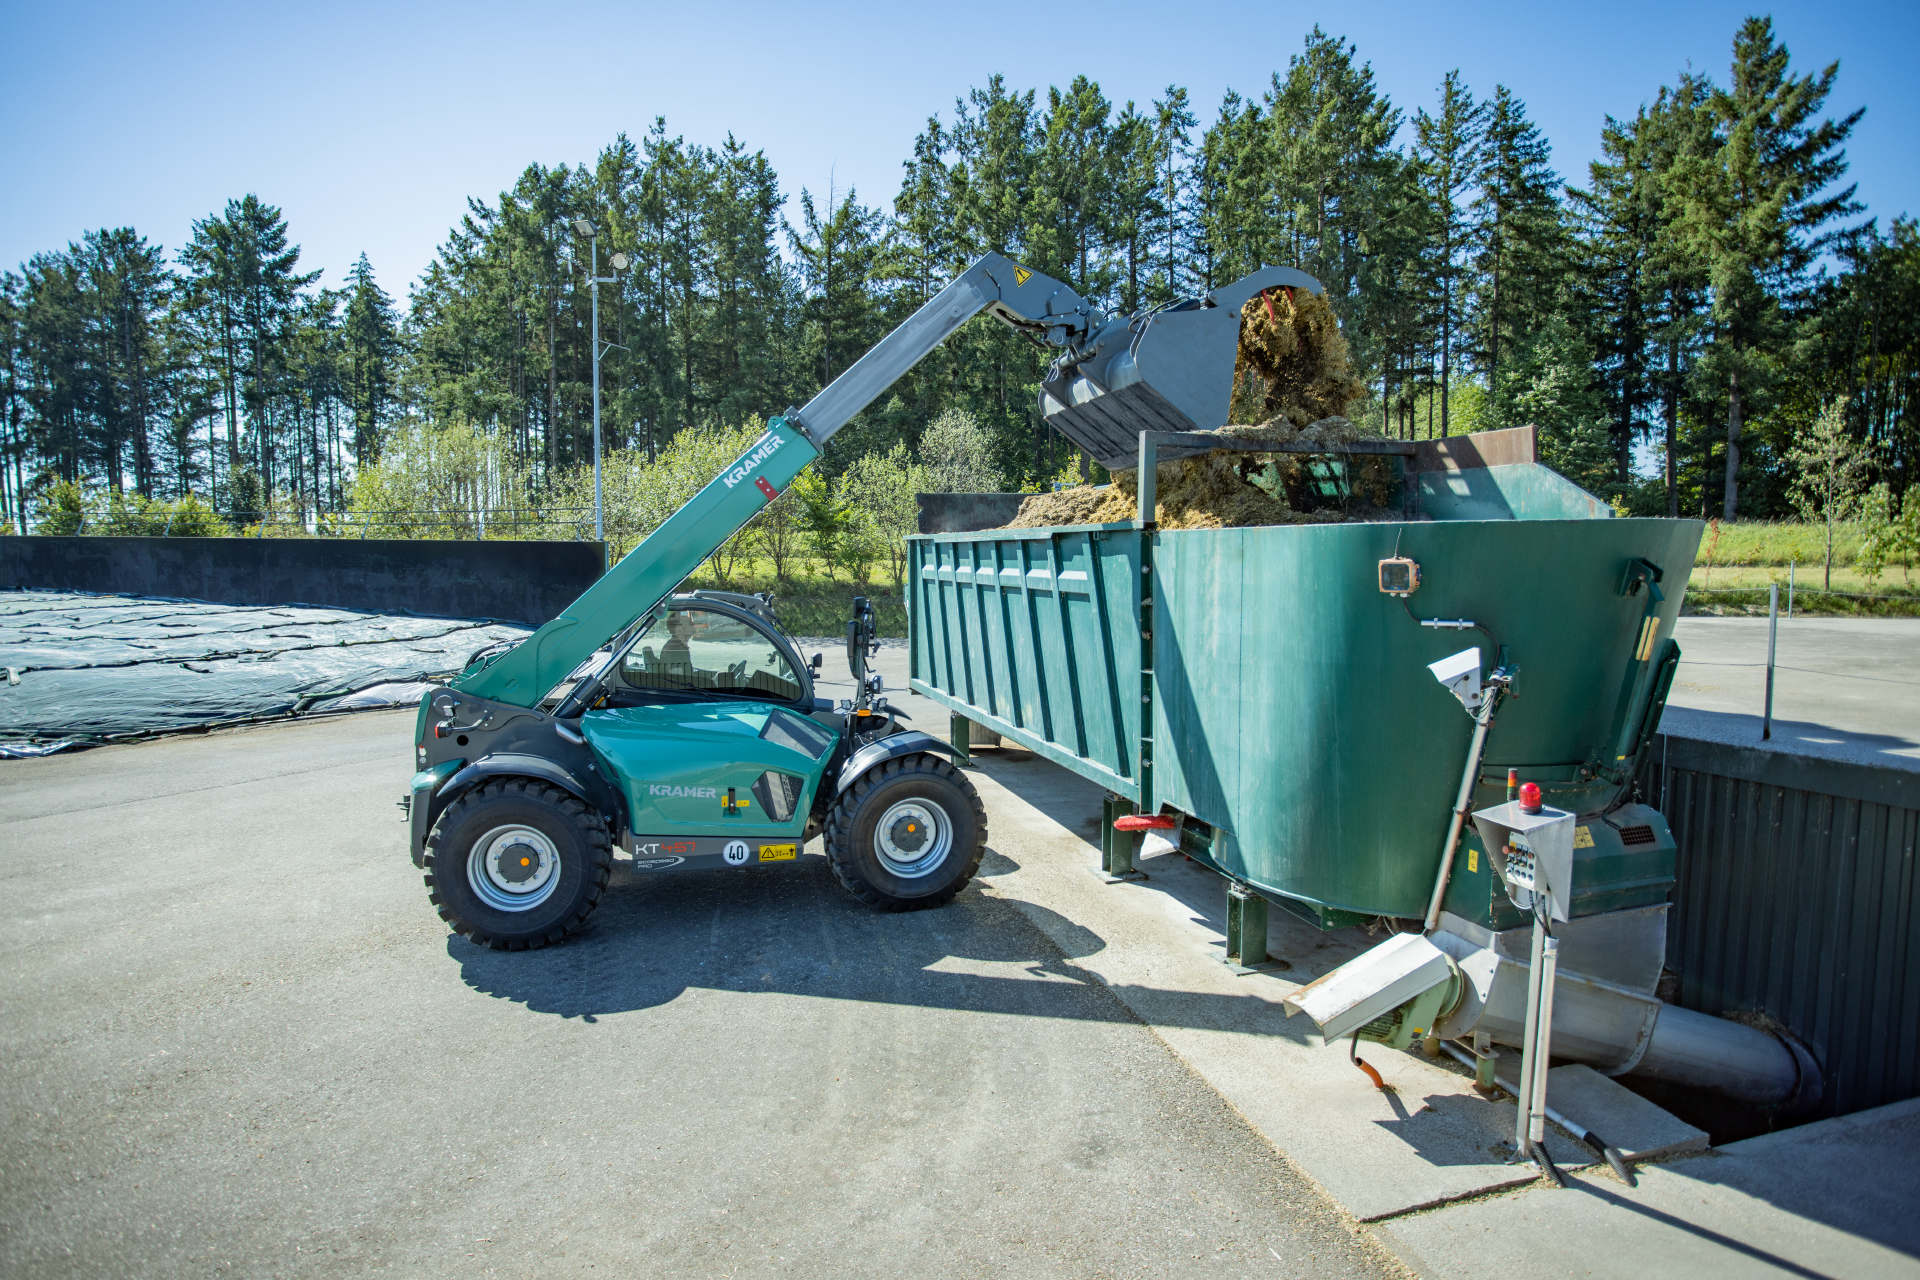 Loading a container is simple and straightforward with the Kramer KT457.